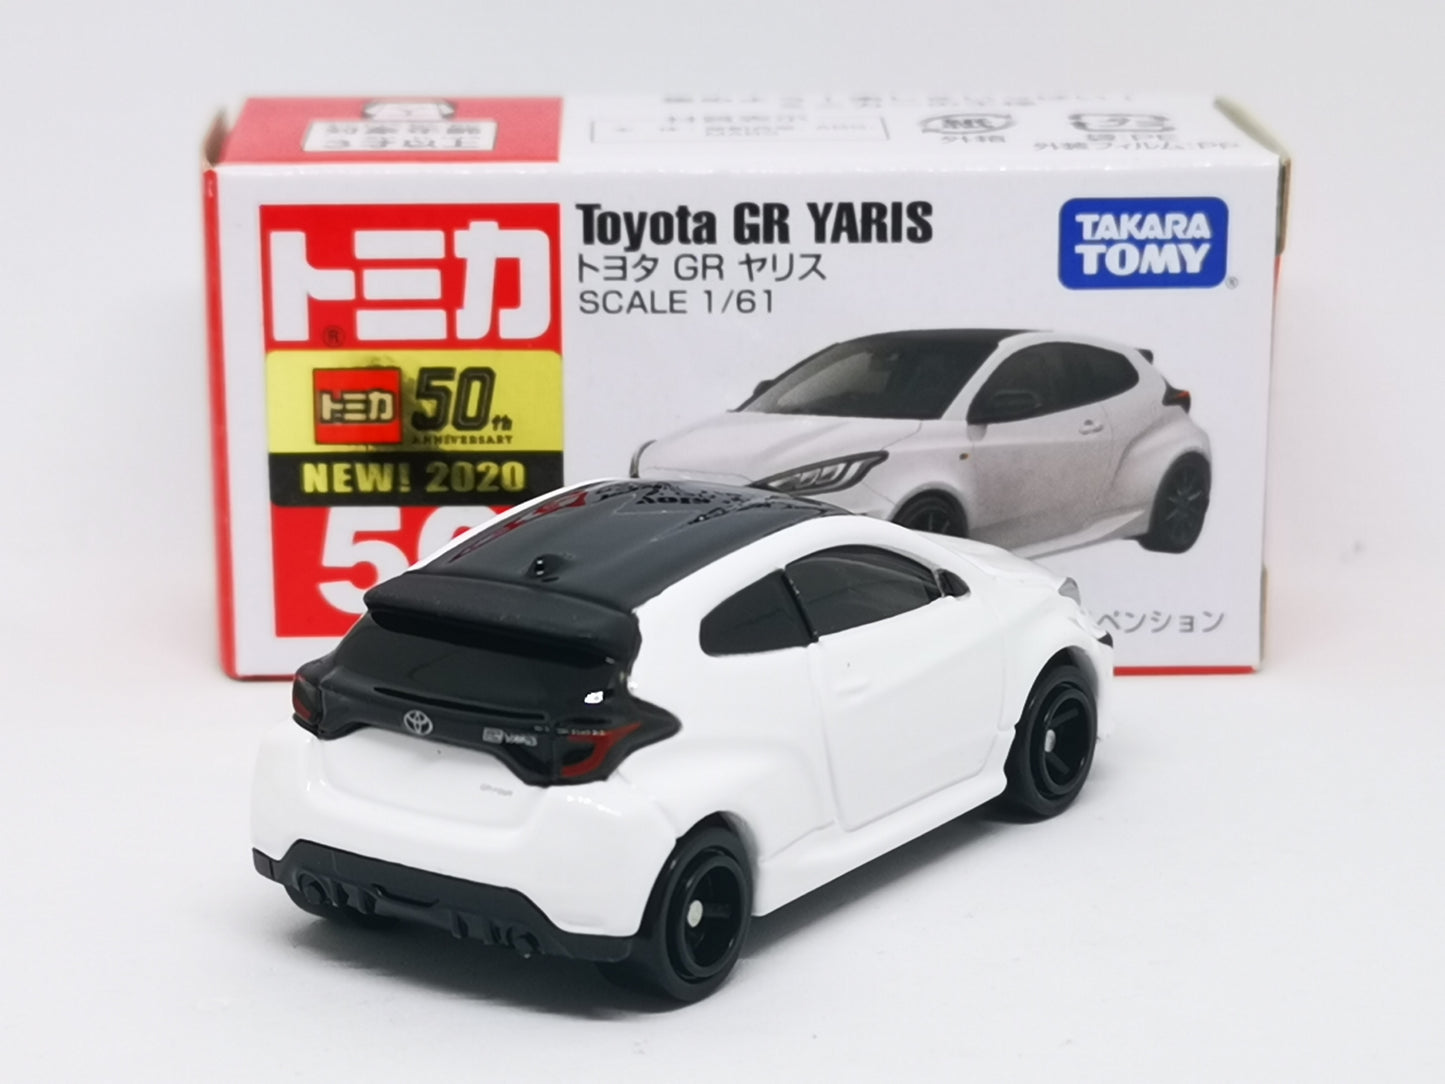 Tomica #50 Toyota GR Yaris 1/64 SCALE set of two